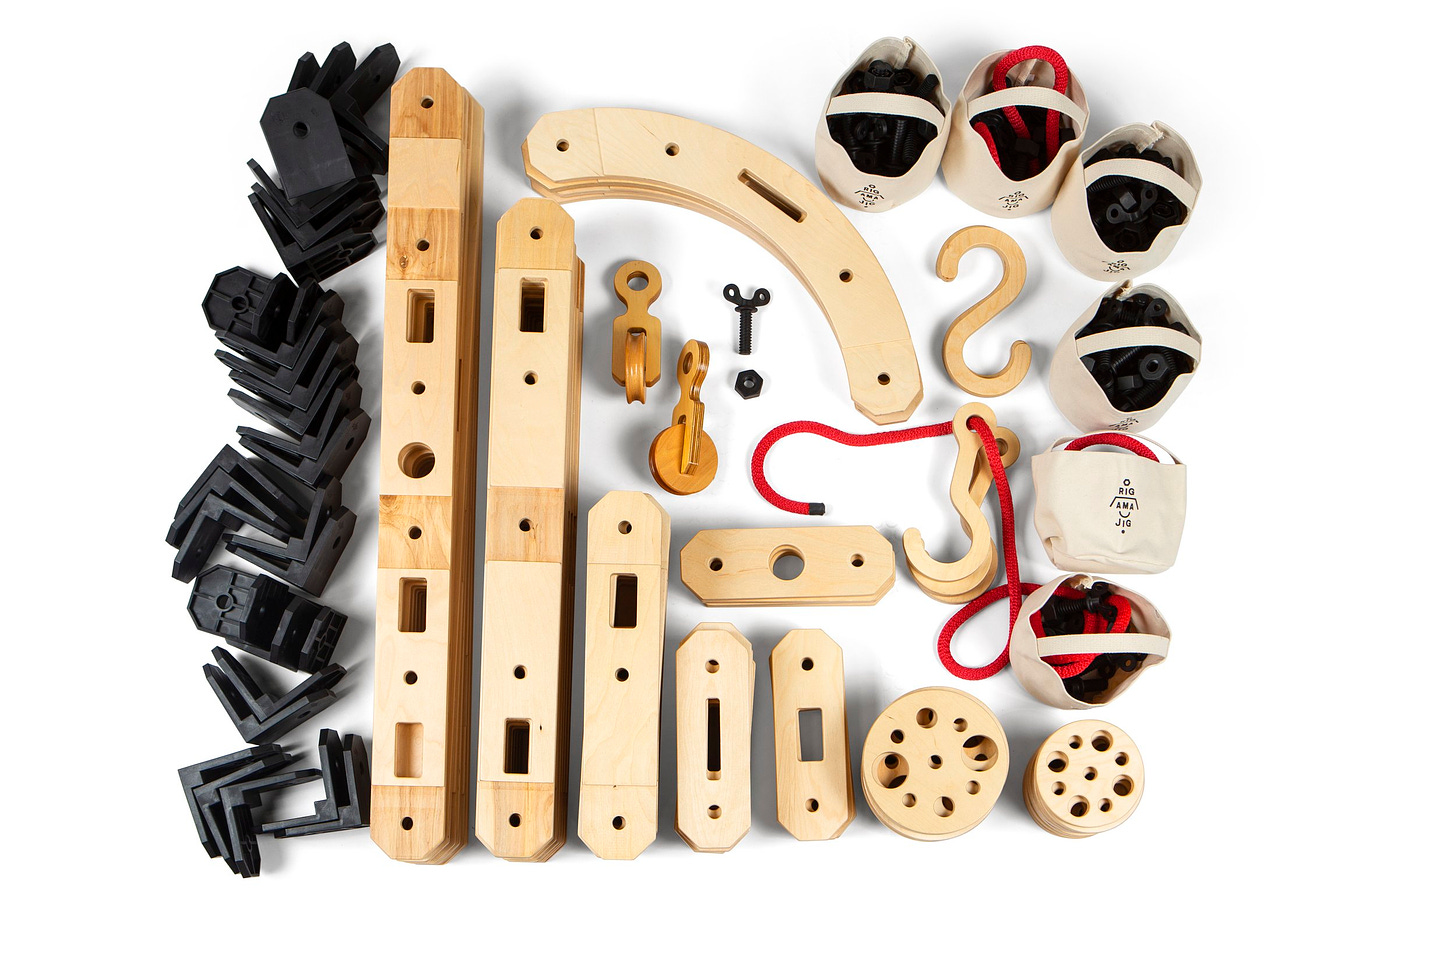 The kit of parts in Rigamajig, gathered in one clean collection: wooden slats with multiple holes for fastening, corner joists, pulleys, hooks, cords, and gears.